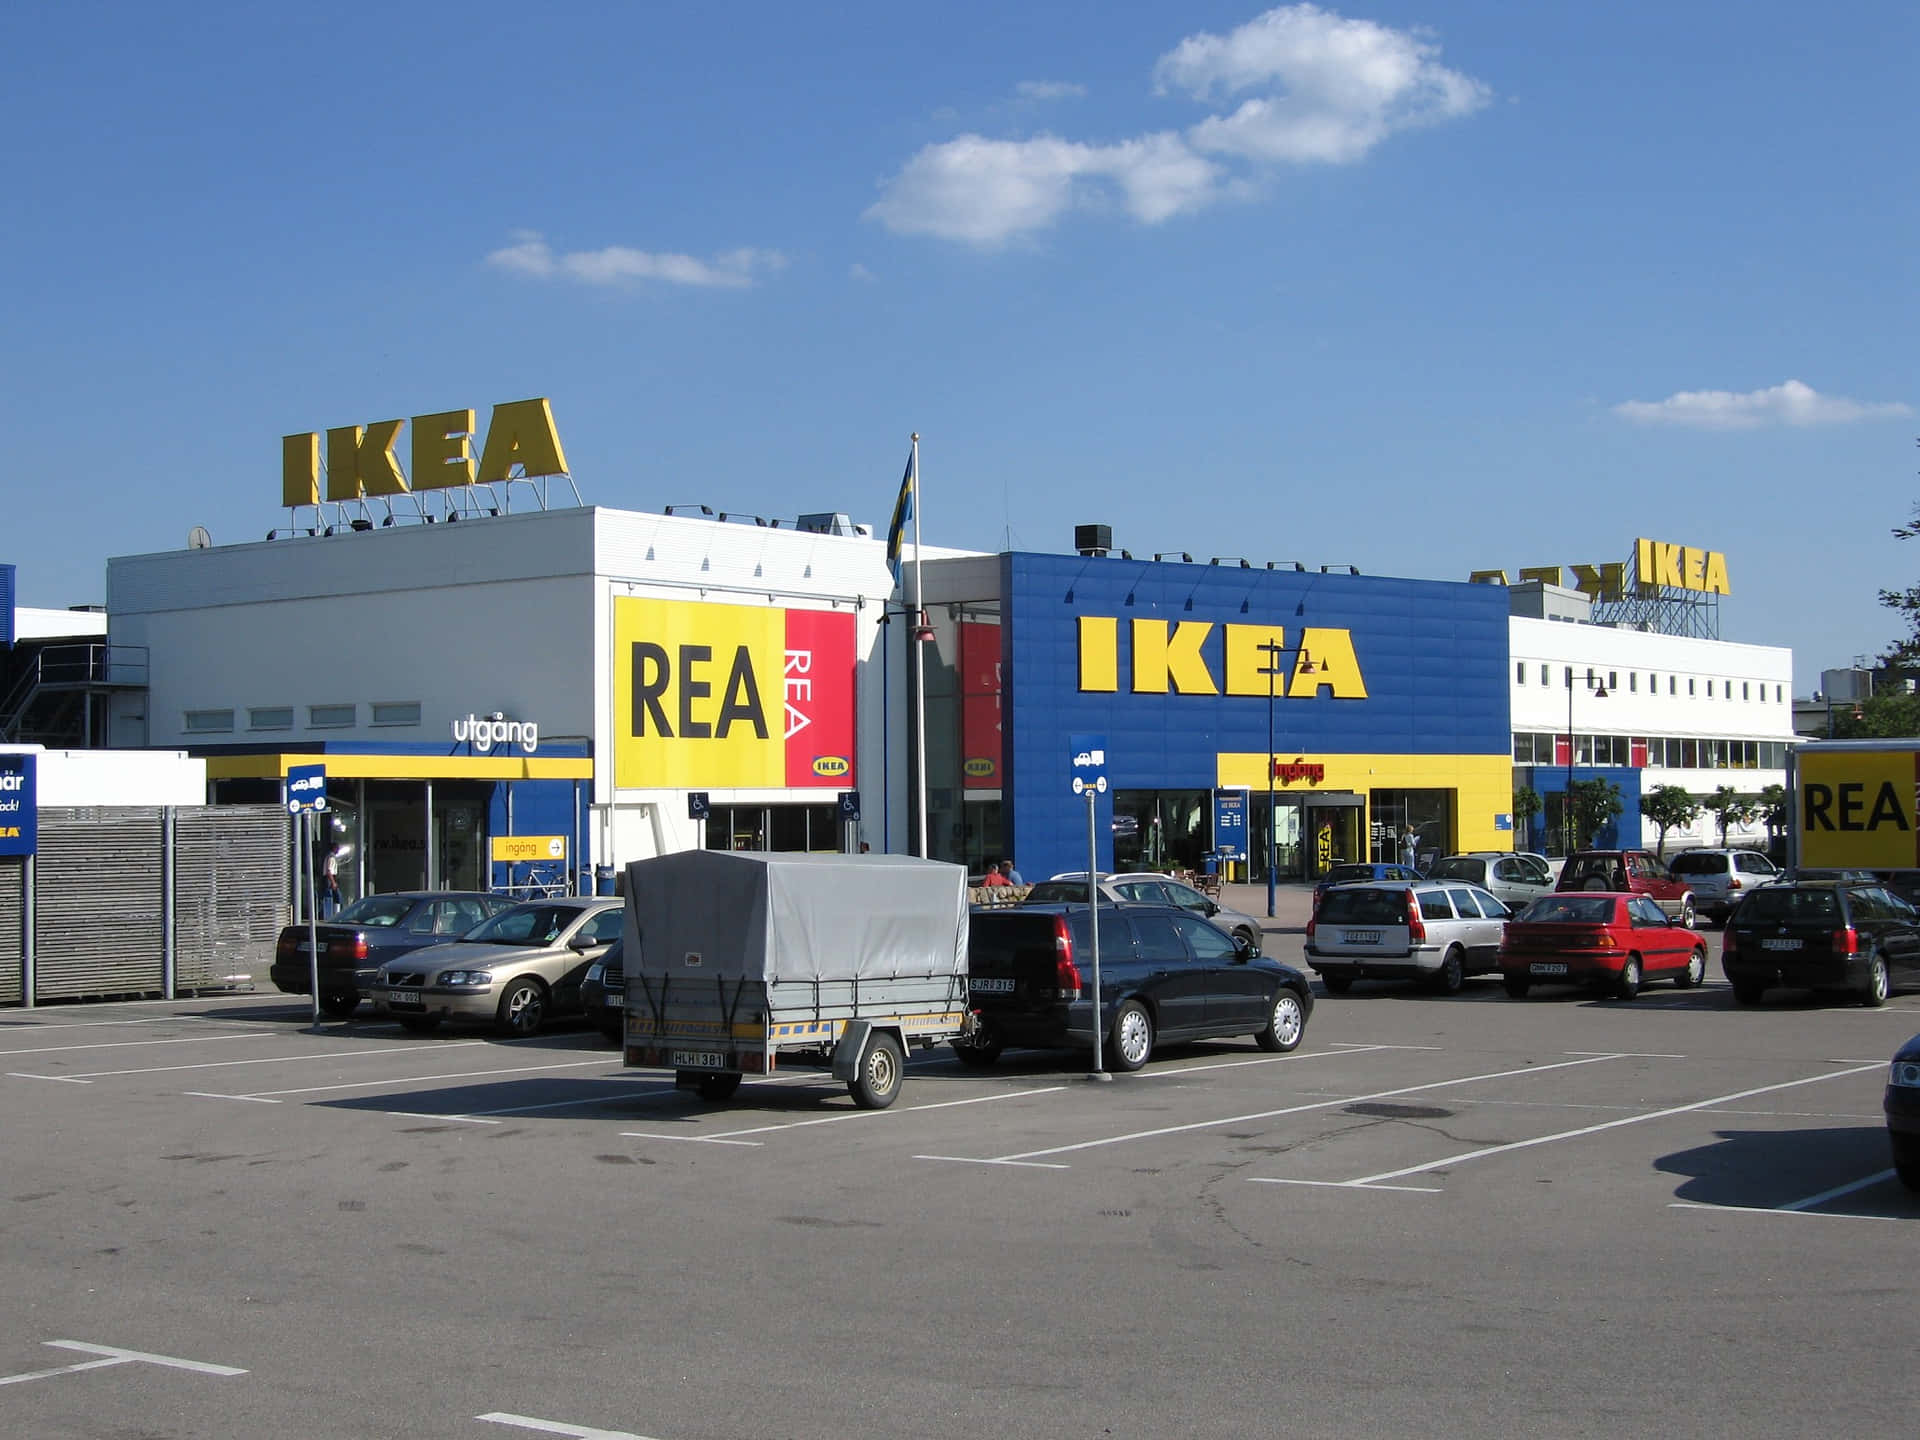 A Ikea Store With Cars Parked In Front Of It